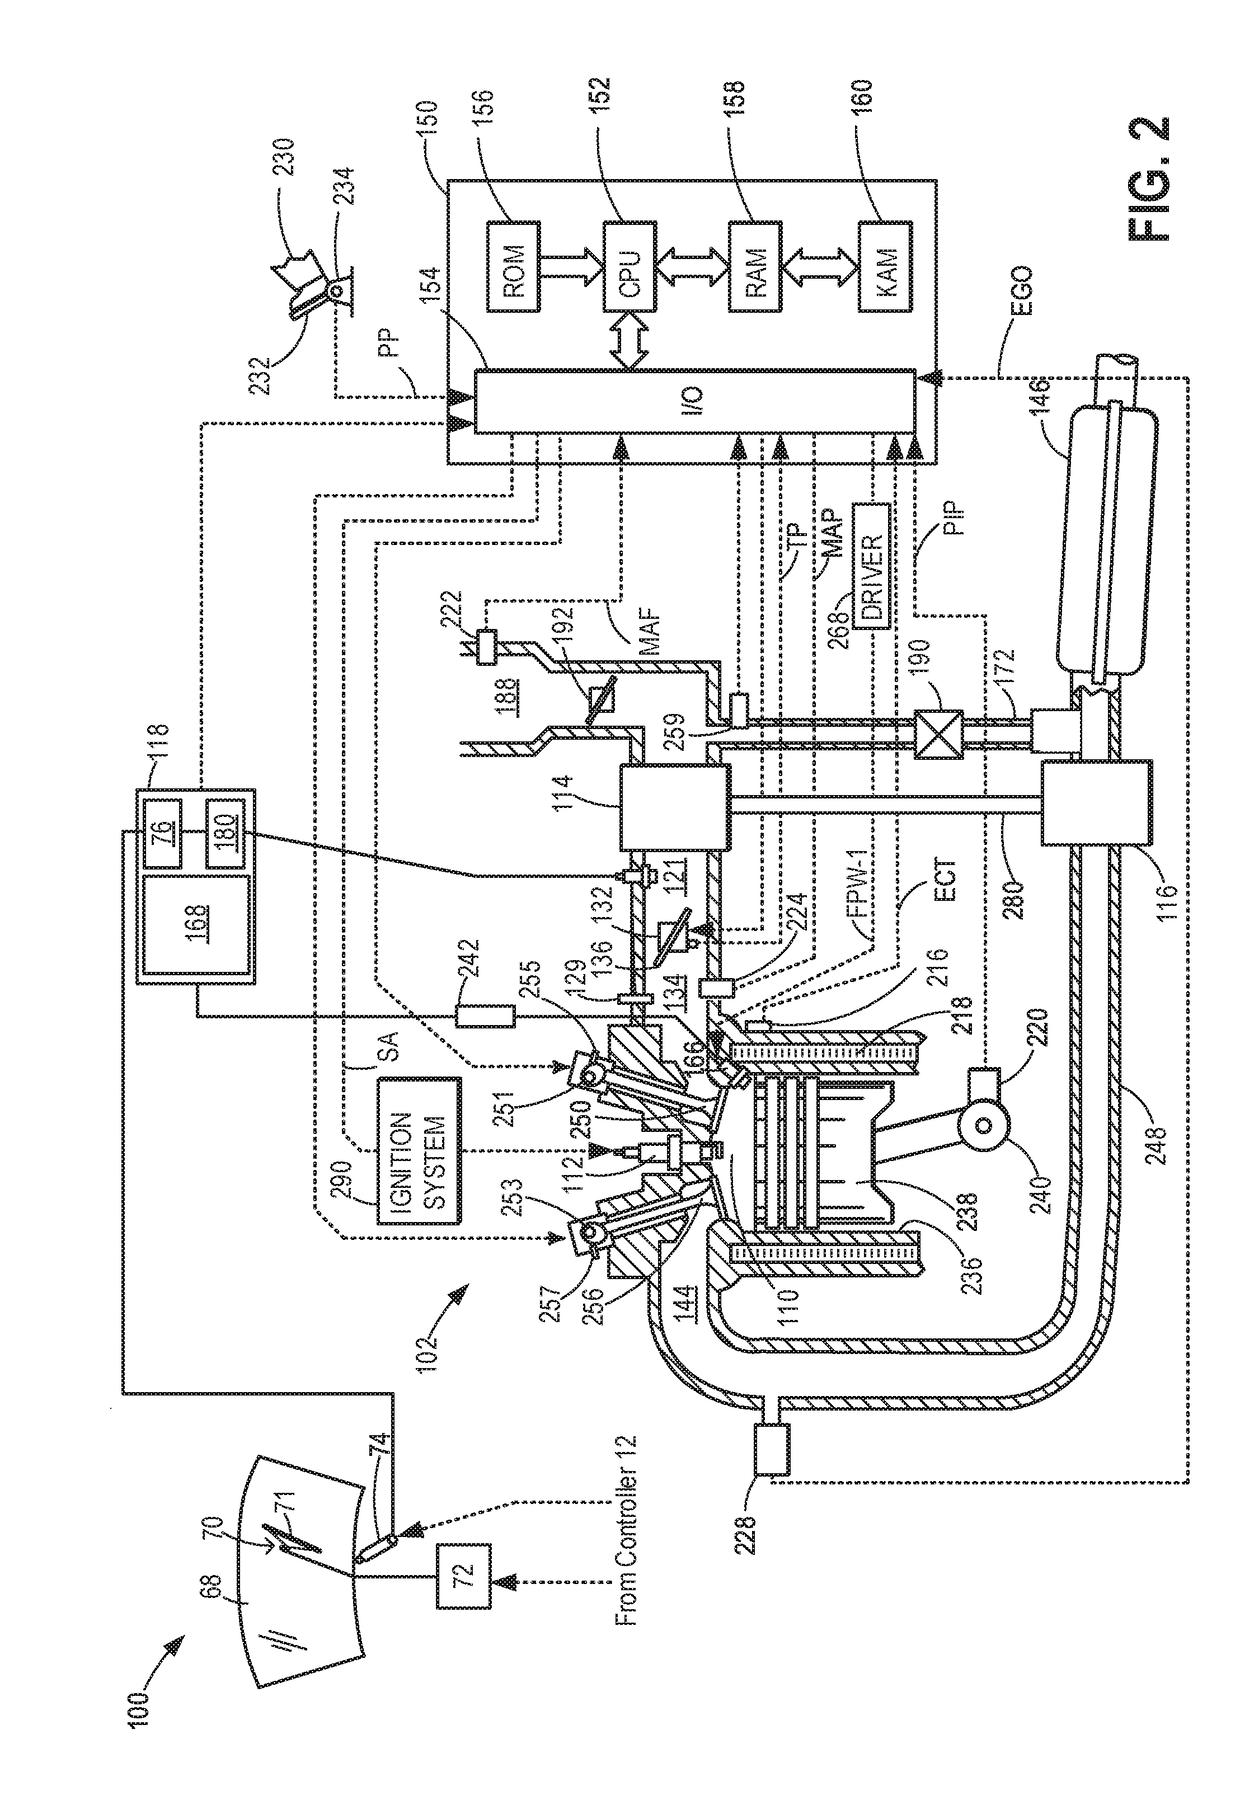 Systems and methods for removing coking deposits in a fuel injection system